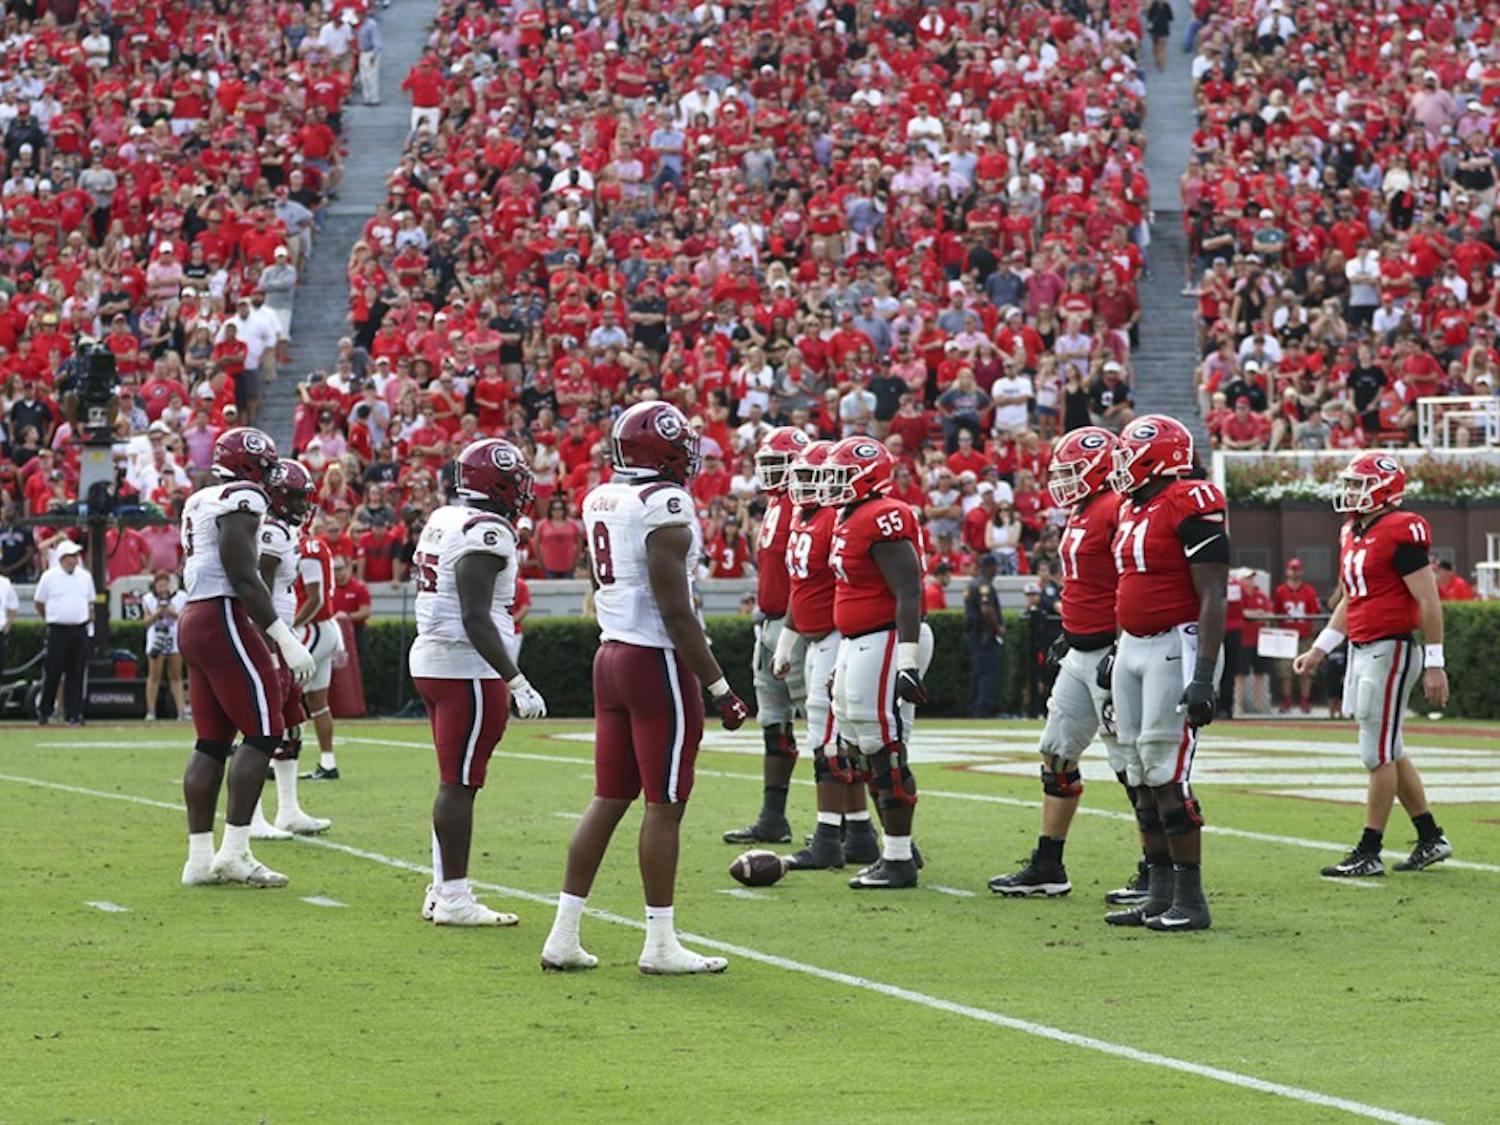 The Gamecocks prepare for a play against UGA during the game in Athens Oct. 12.